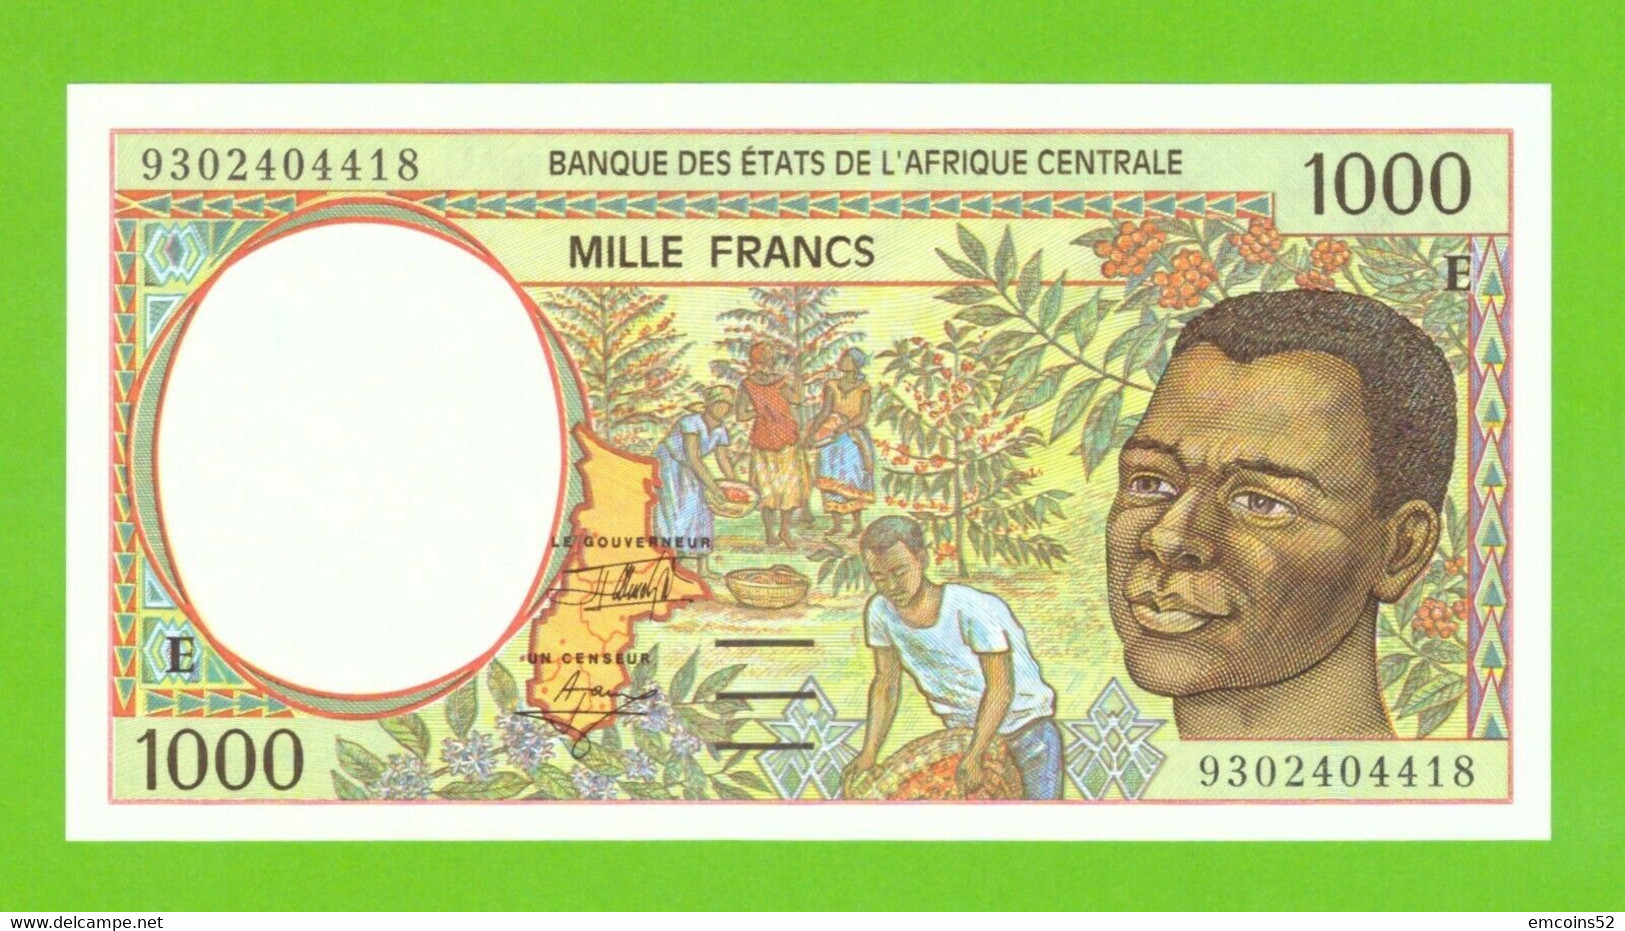 CAMEROUN C.A.S. 1000 FRANCS 1993  P-202Ea   UNC - Central African States